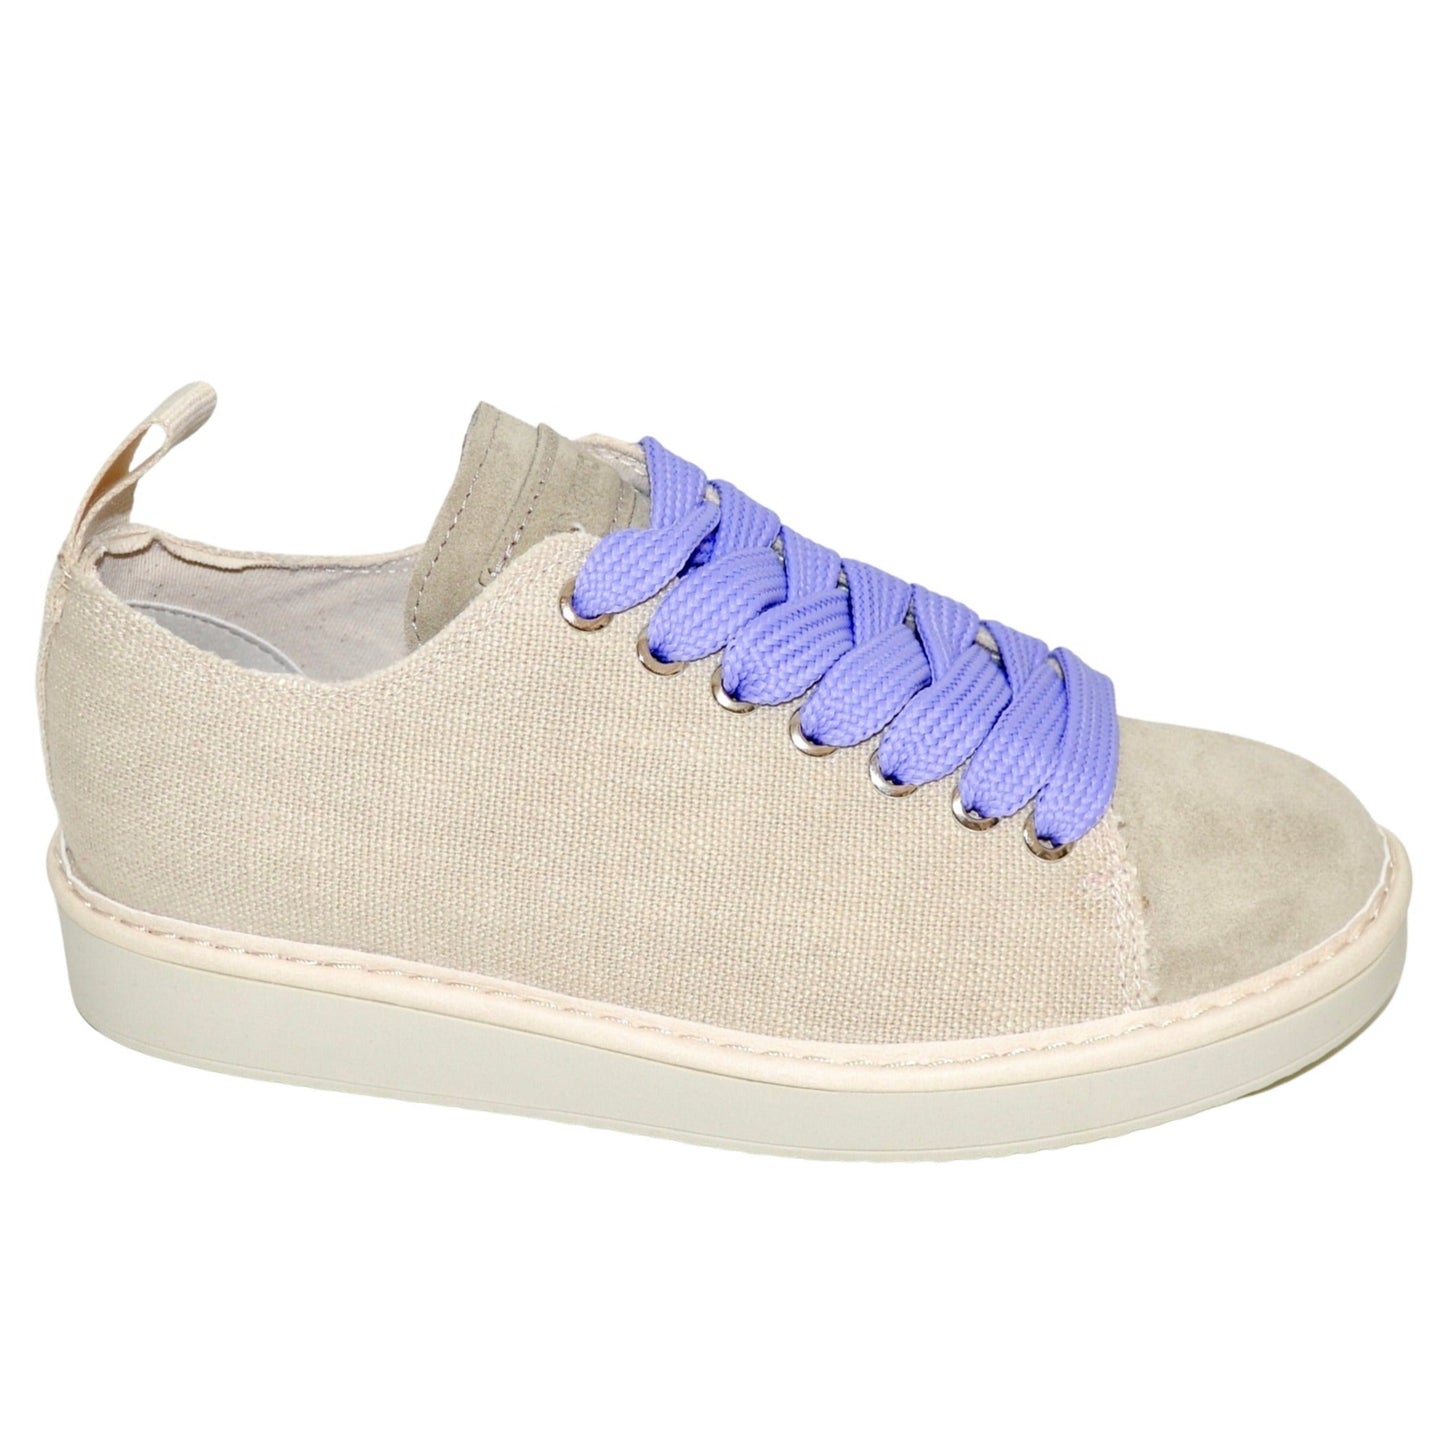 Sneakers Panchic woman grey linen and suede